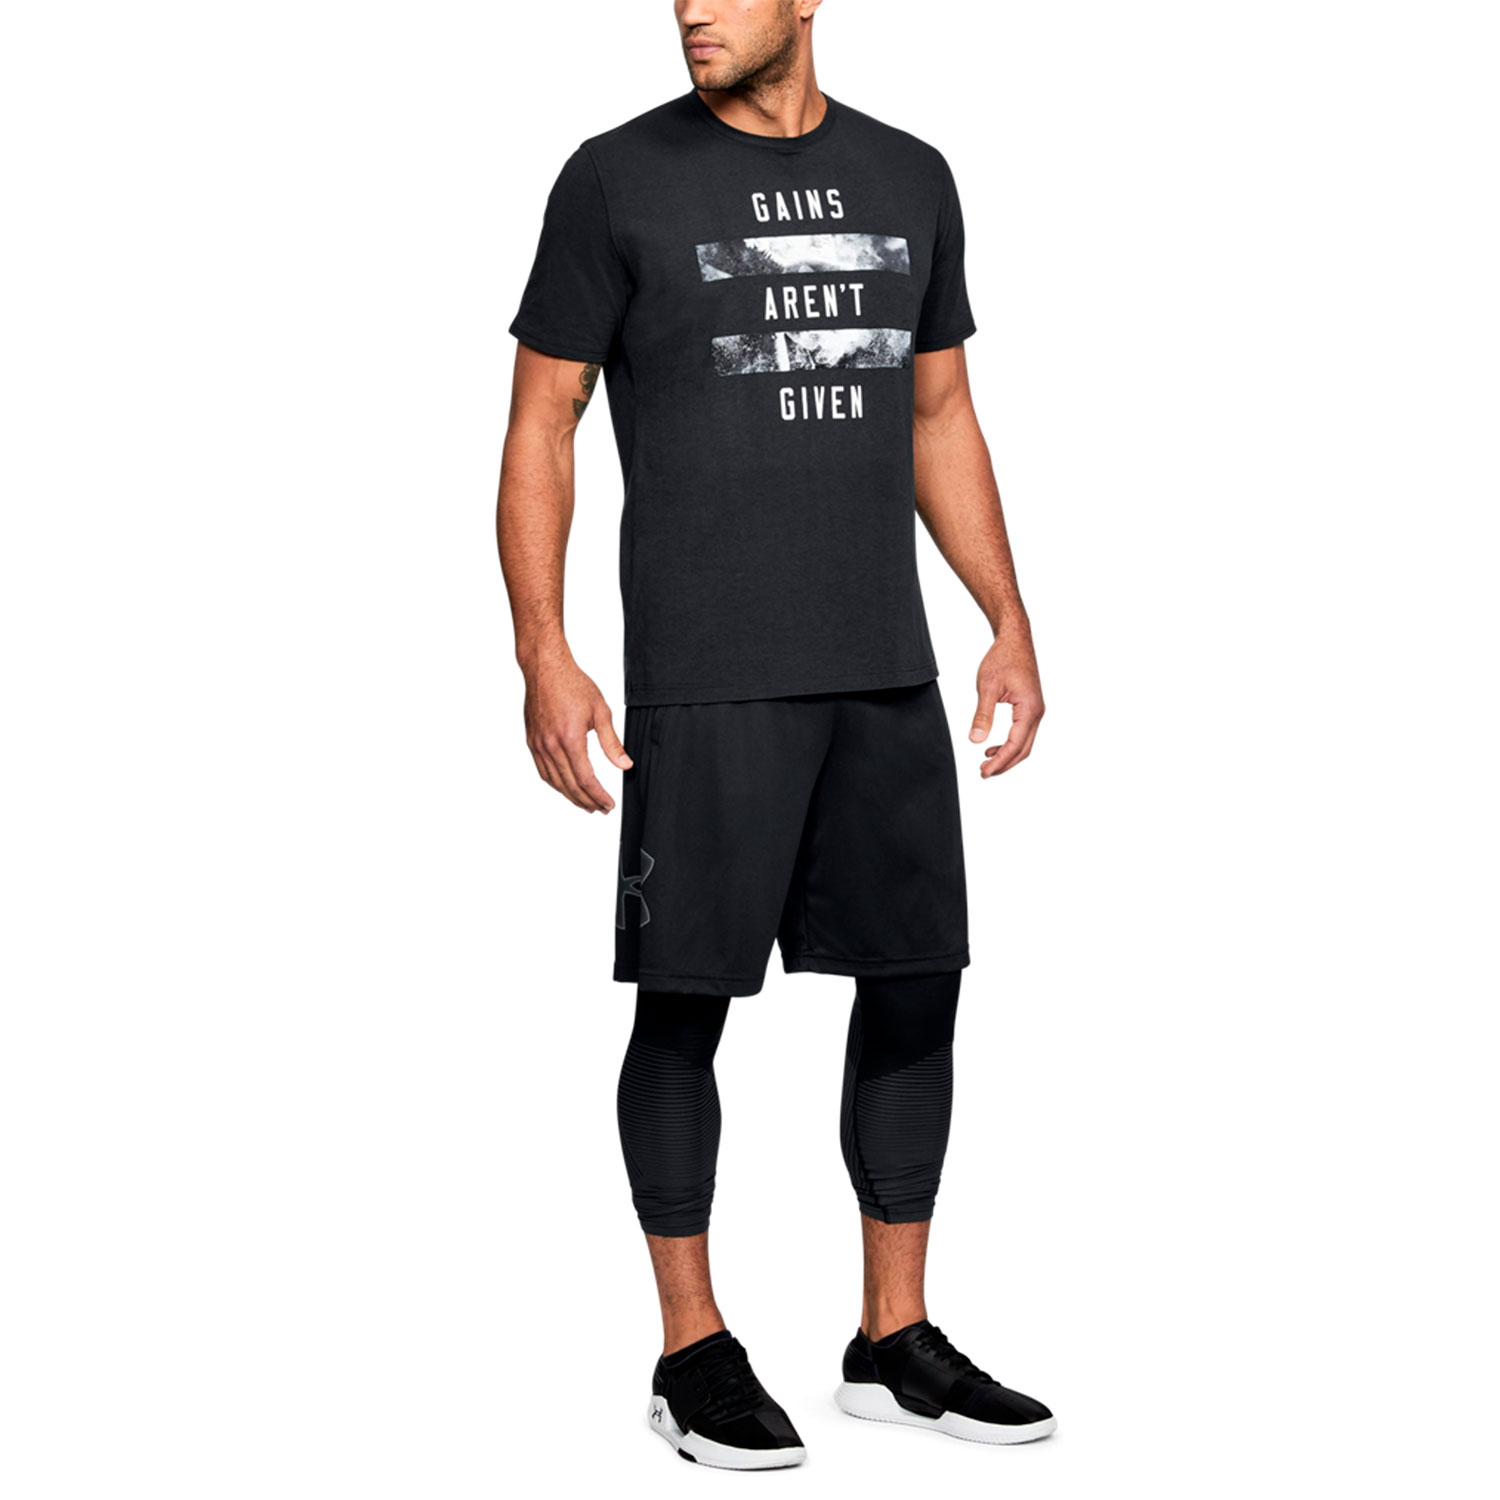 Under Armour Tech Graphic 10in Shorts - Black/Graphite